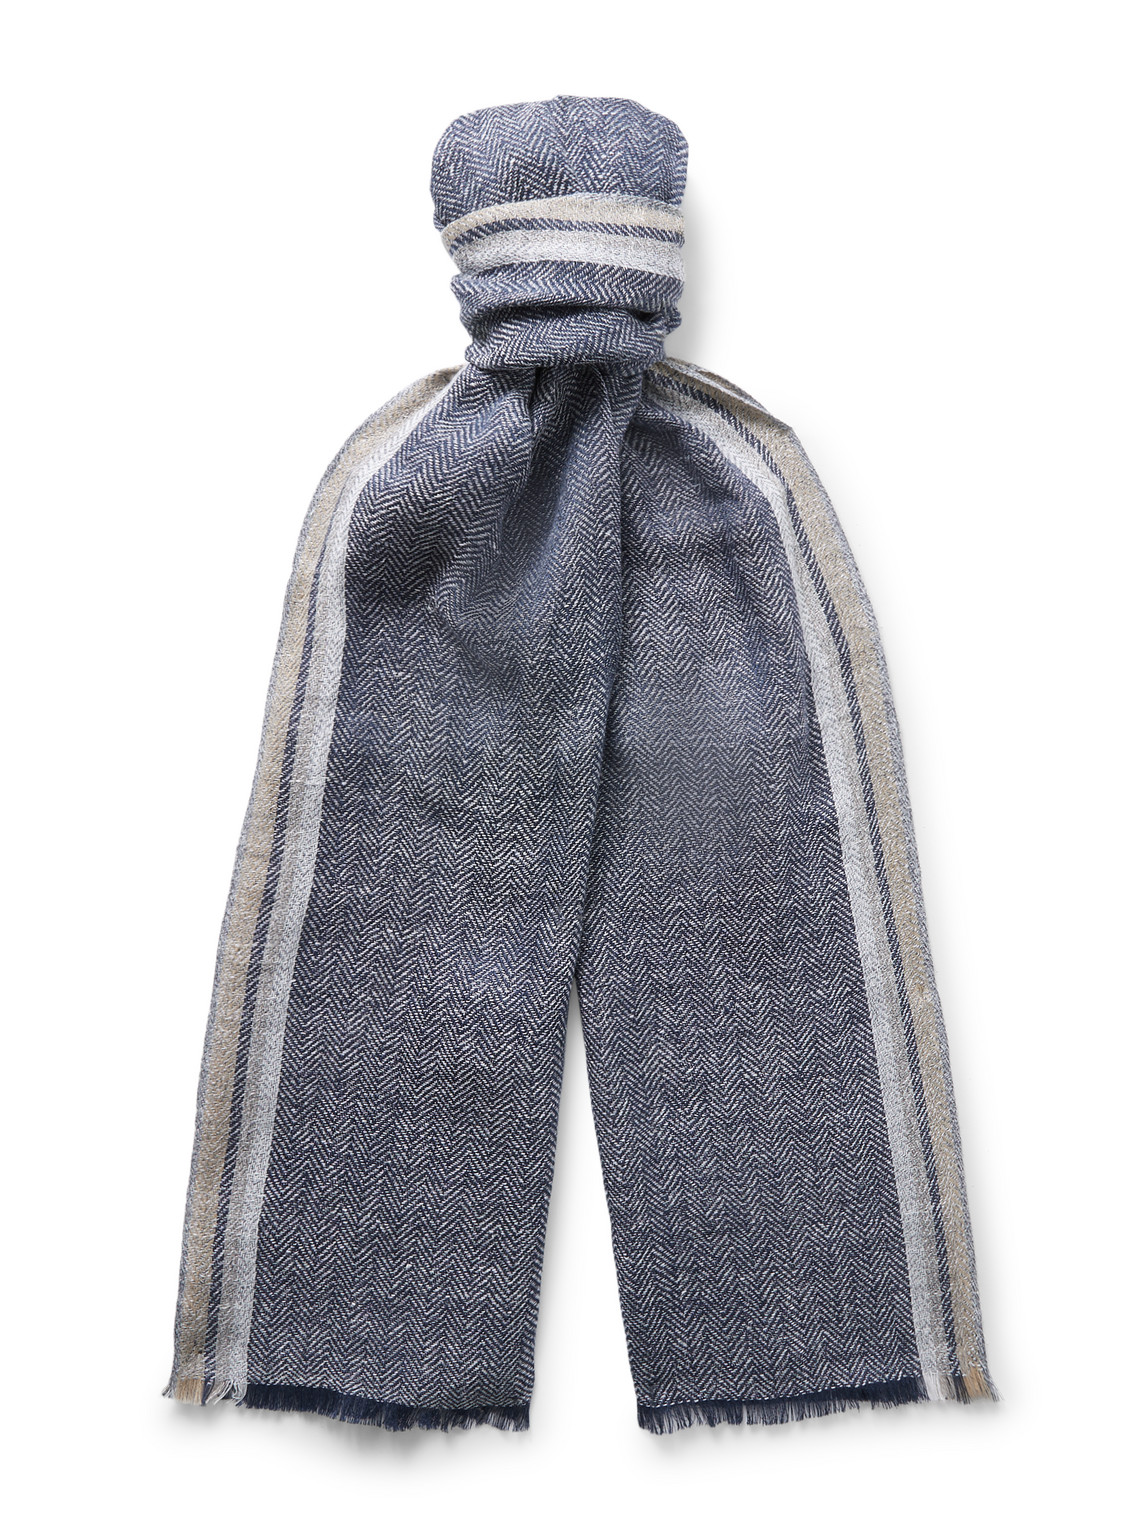 Avaiki Fringed Striped Herringbone Linen and Cotton-Blend Scarf